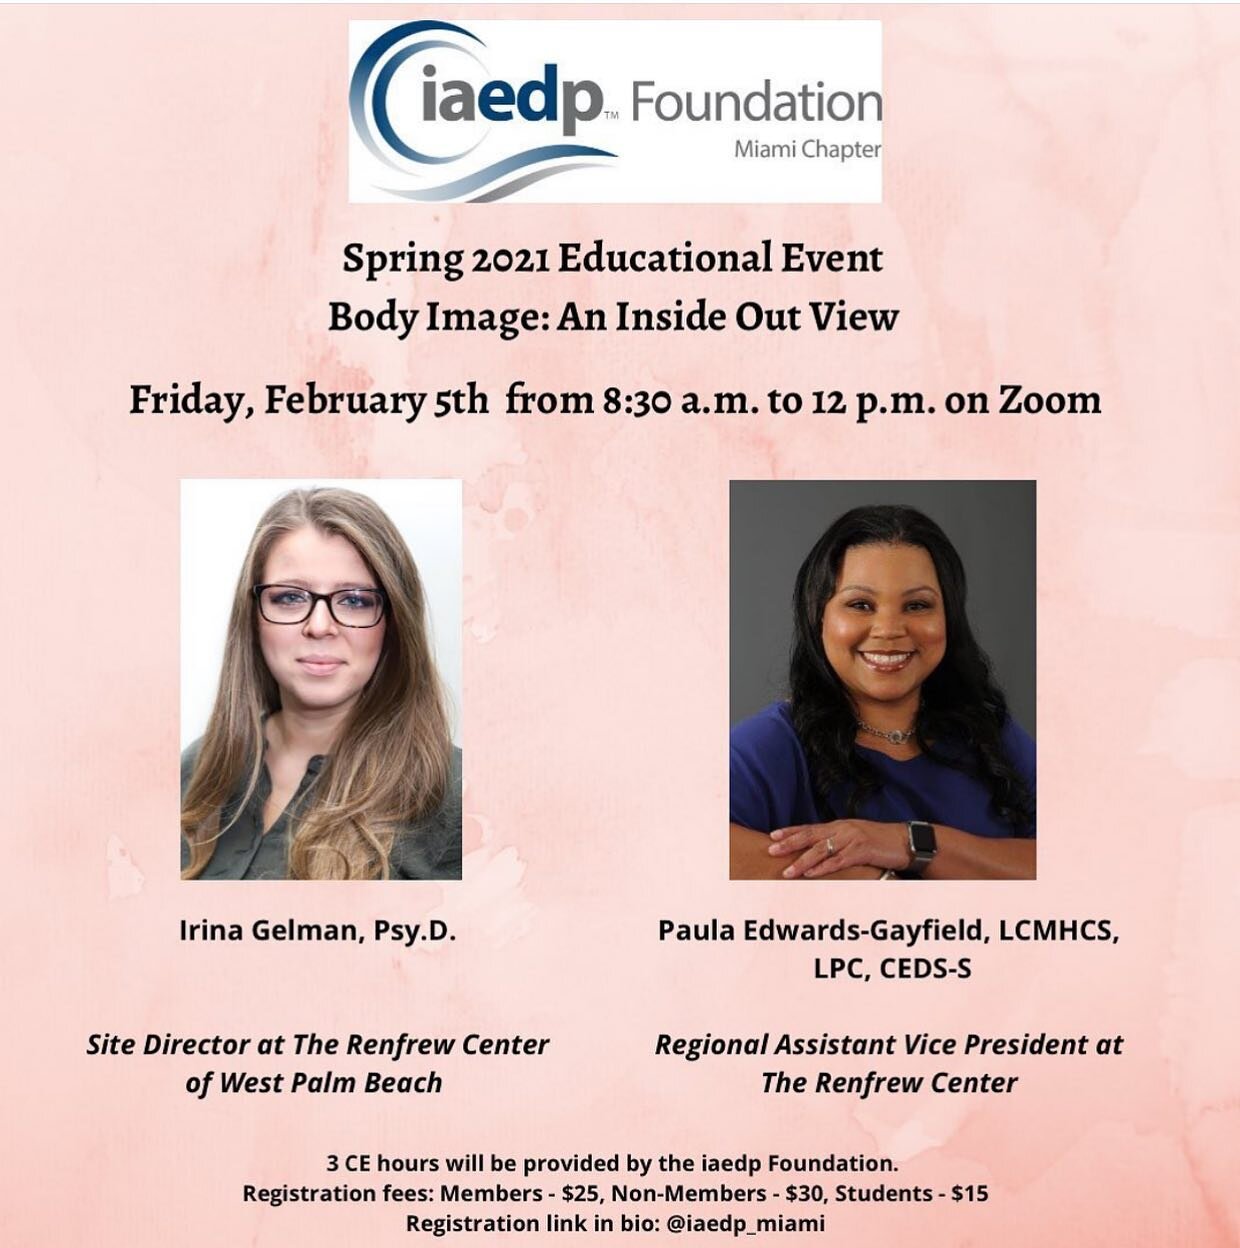 It&rsquo;s not too late to join us! This Friday, 2/5, IAEDP Miami will be putting on the first educational workshop of the year. I&rsquo;m really looking forward to @renfrewcenter speakers presenting on body image and self-acceptance. 

Find link in 